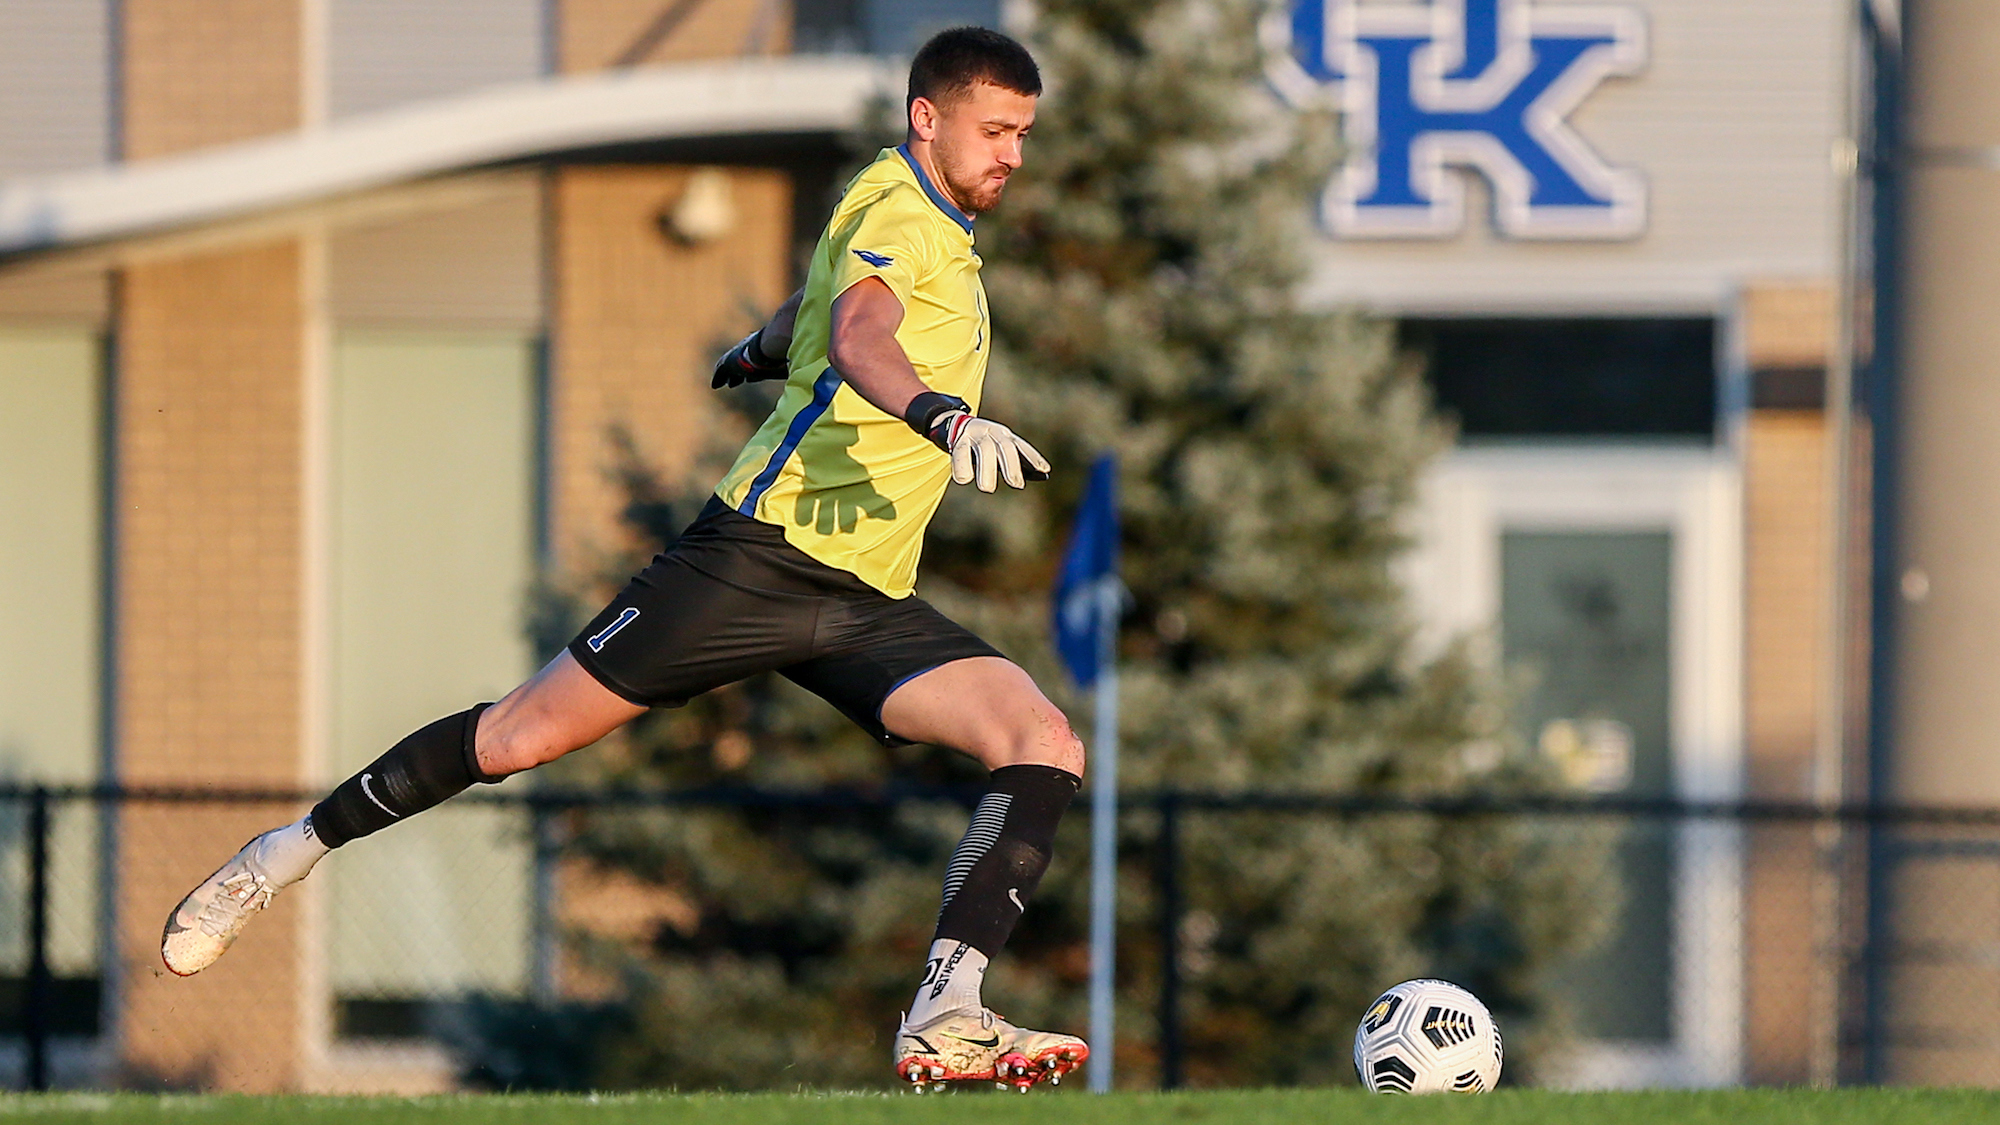 UK Soccer Hopes 'Strength in Numbers' Continues to Carry Team